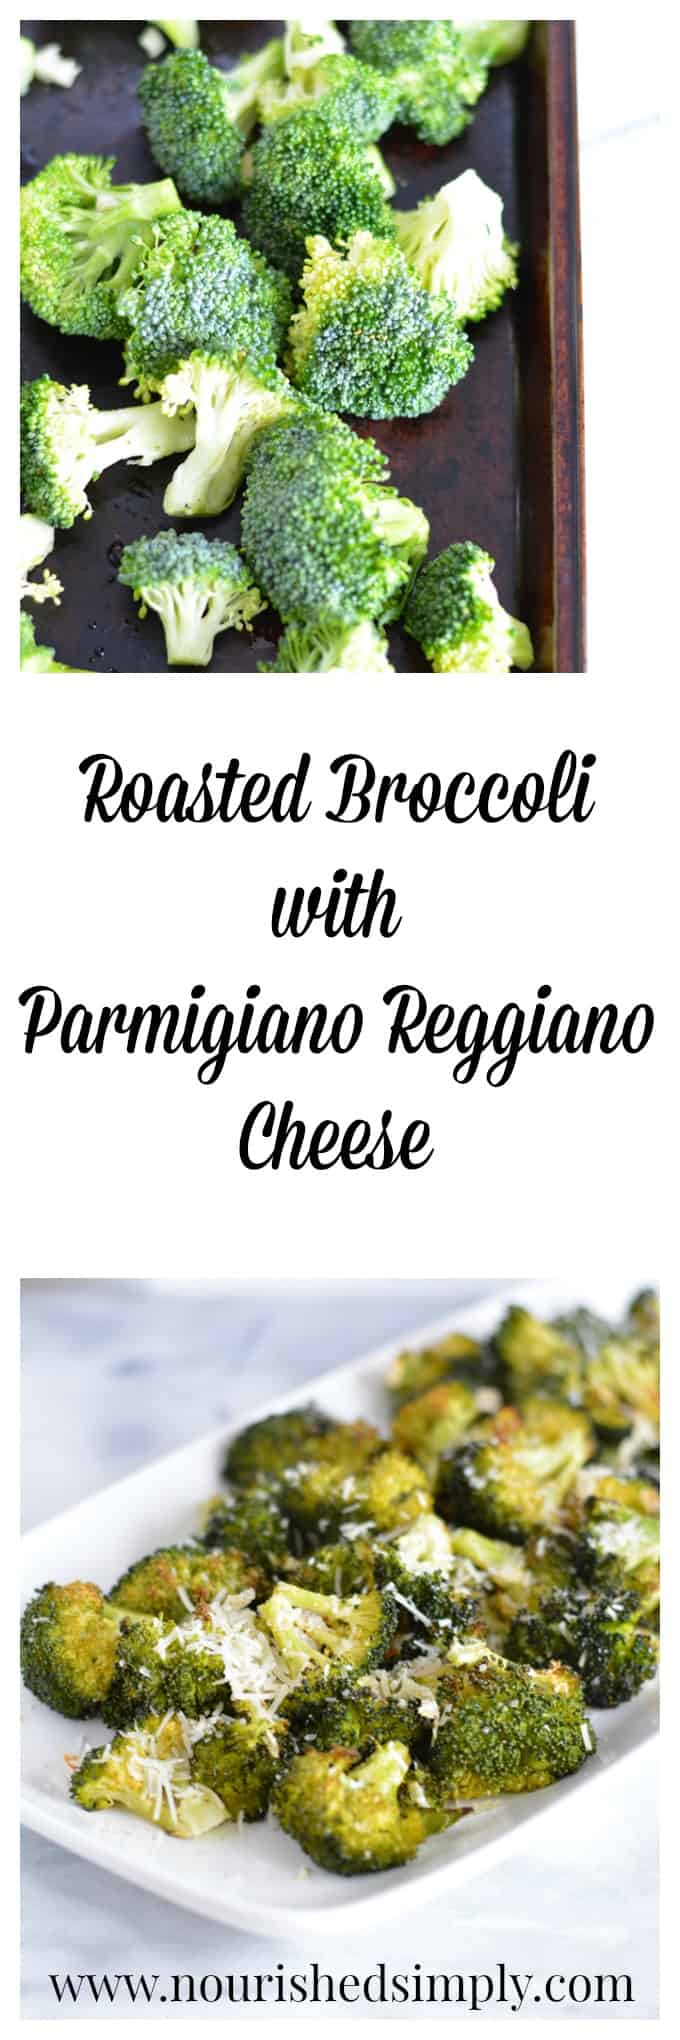 Roasted Broccoli with Parmigiano Reggiano Cheese lets you enjoy broccoli with cheese without the extra calories of traditional broccoli with cheese sauce.